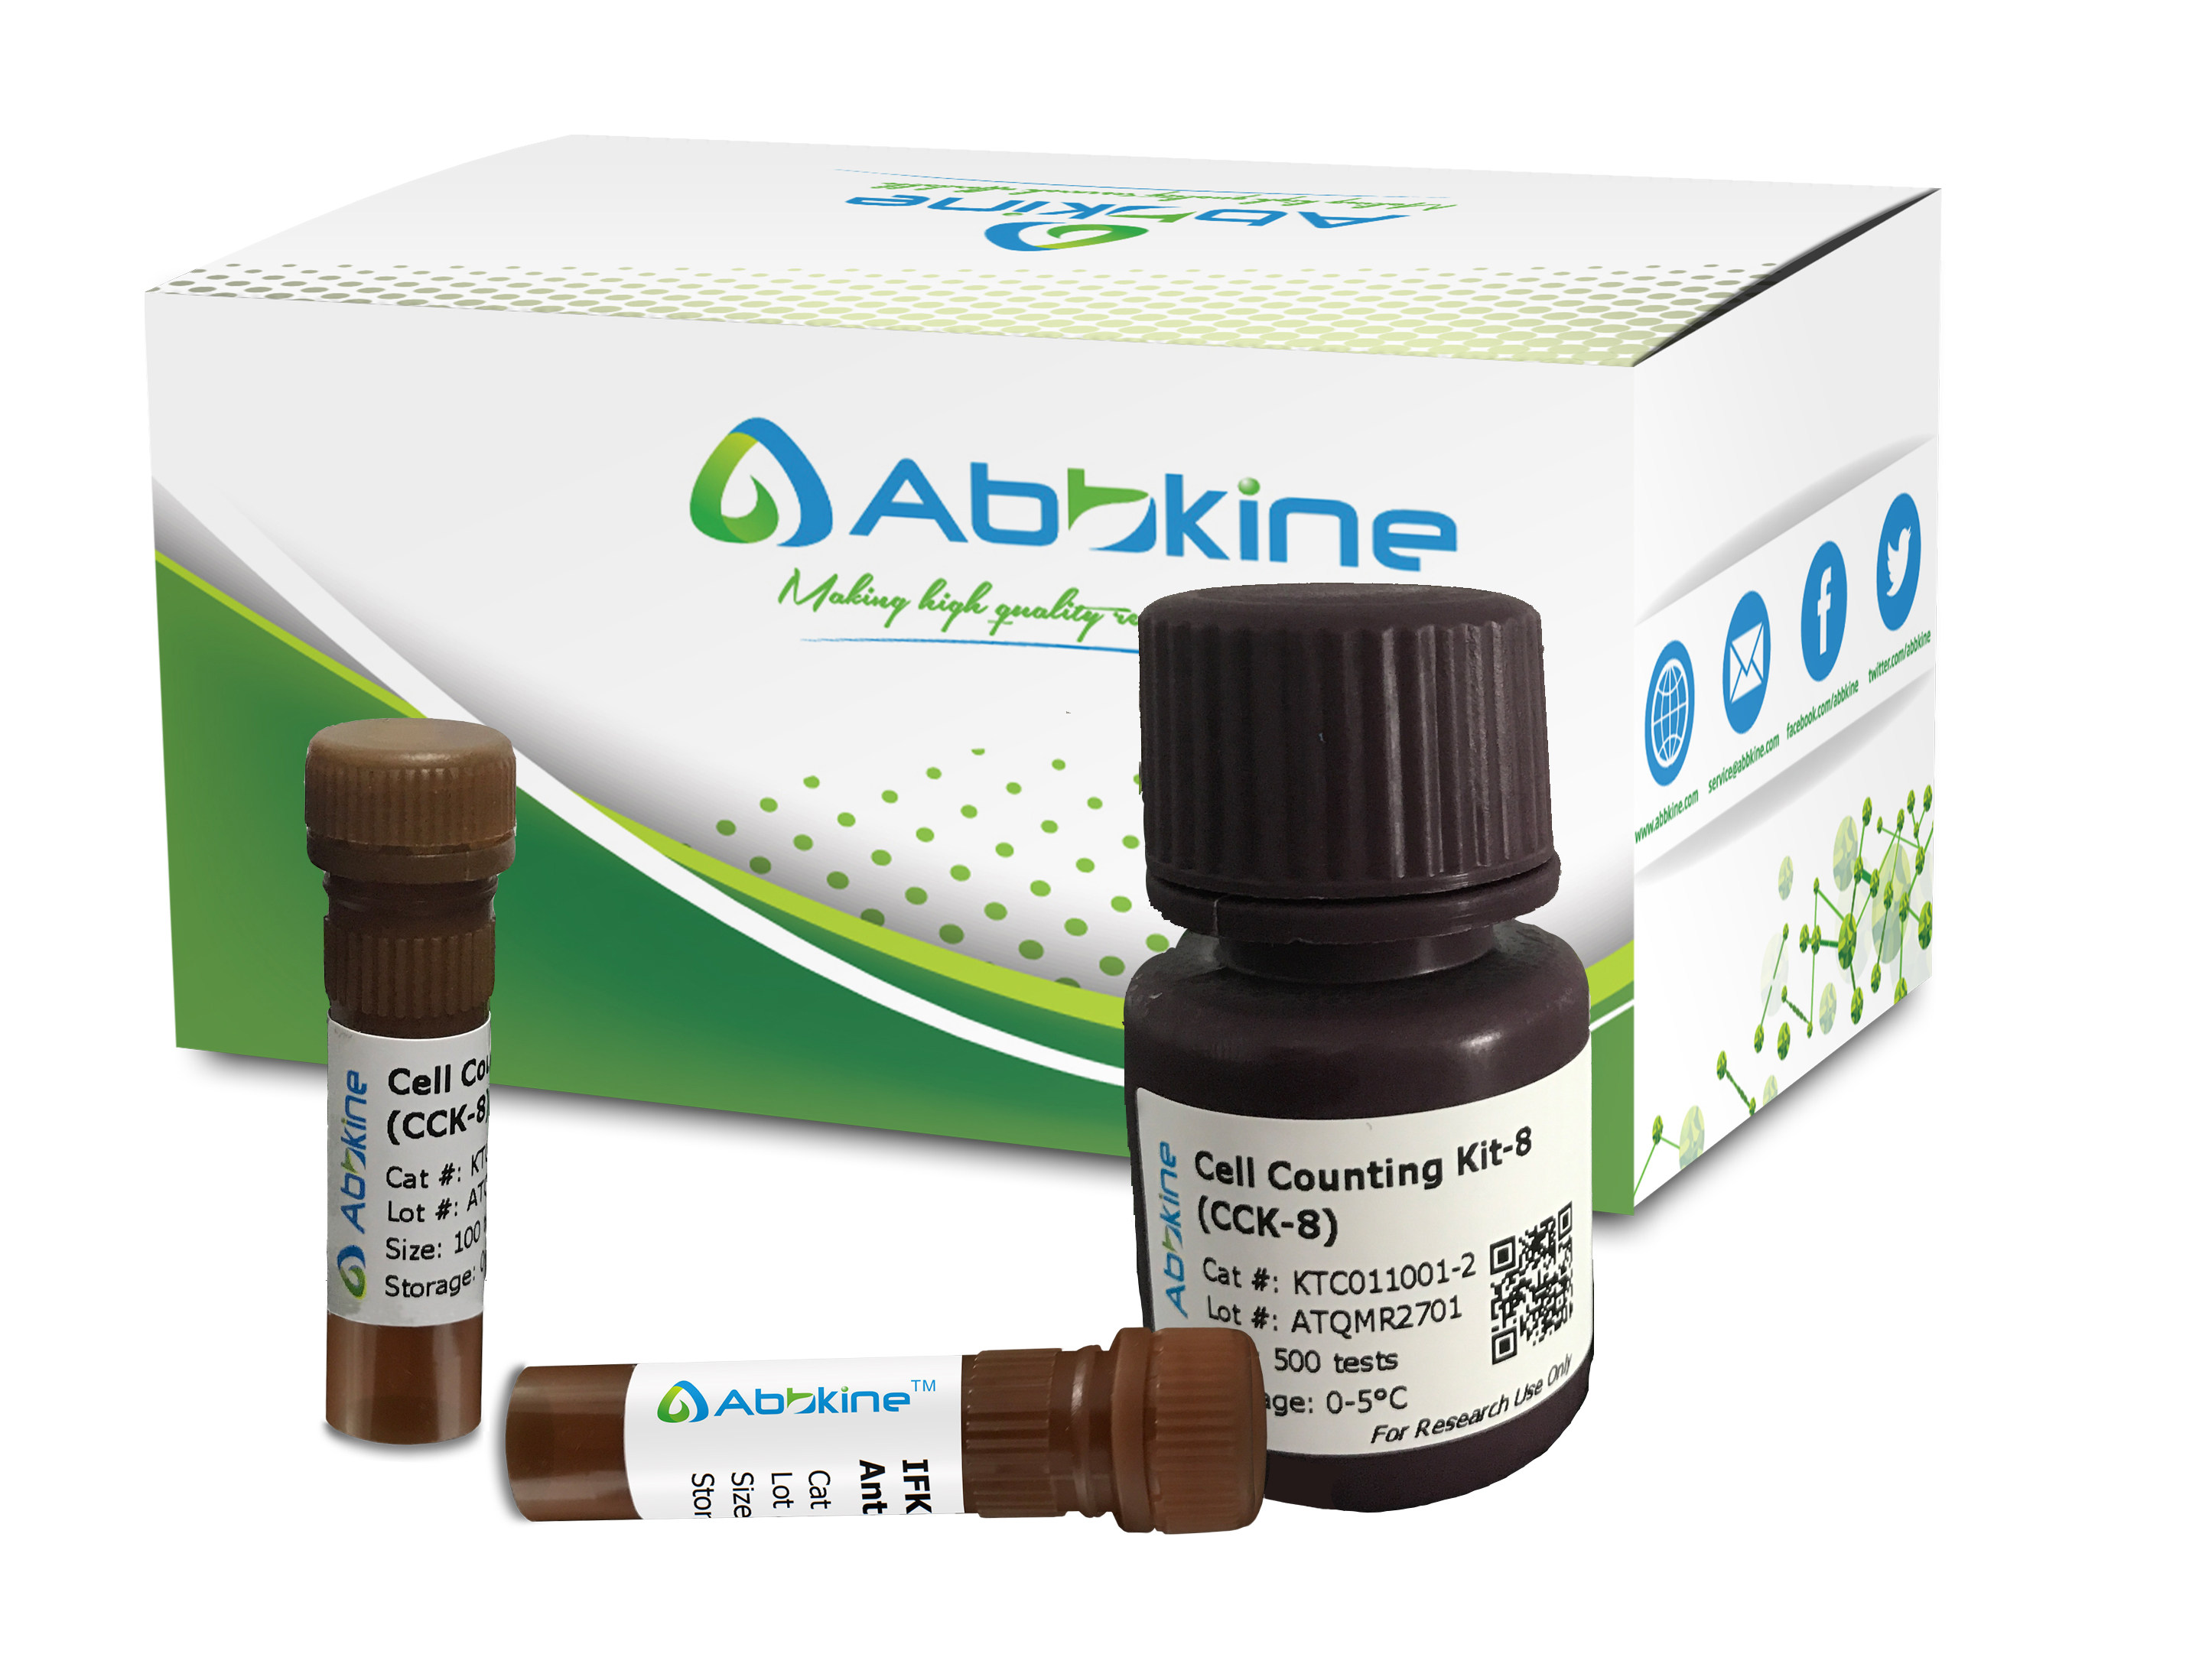 This is Abbkine's Cell Counting Kit-8 picture